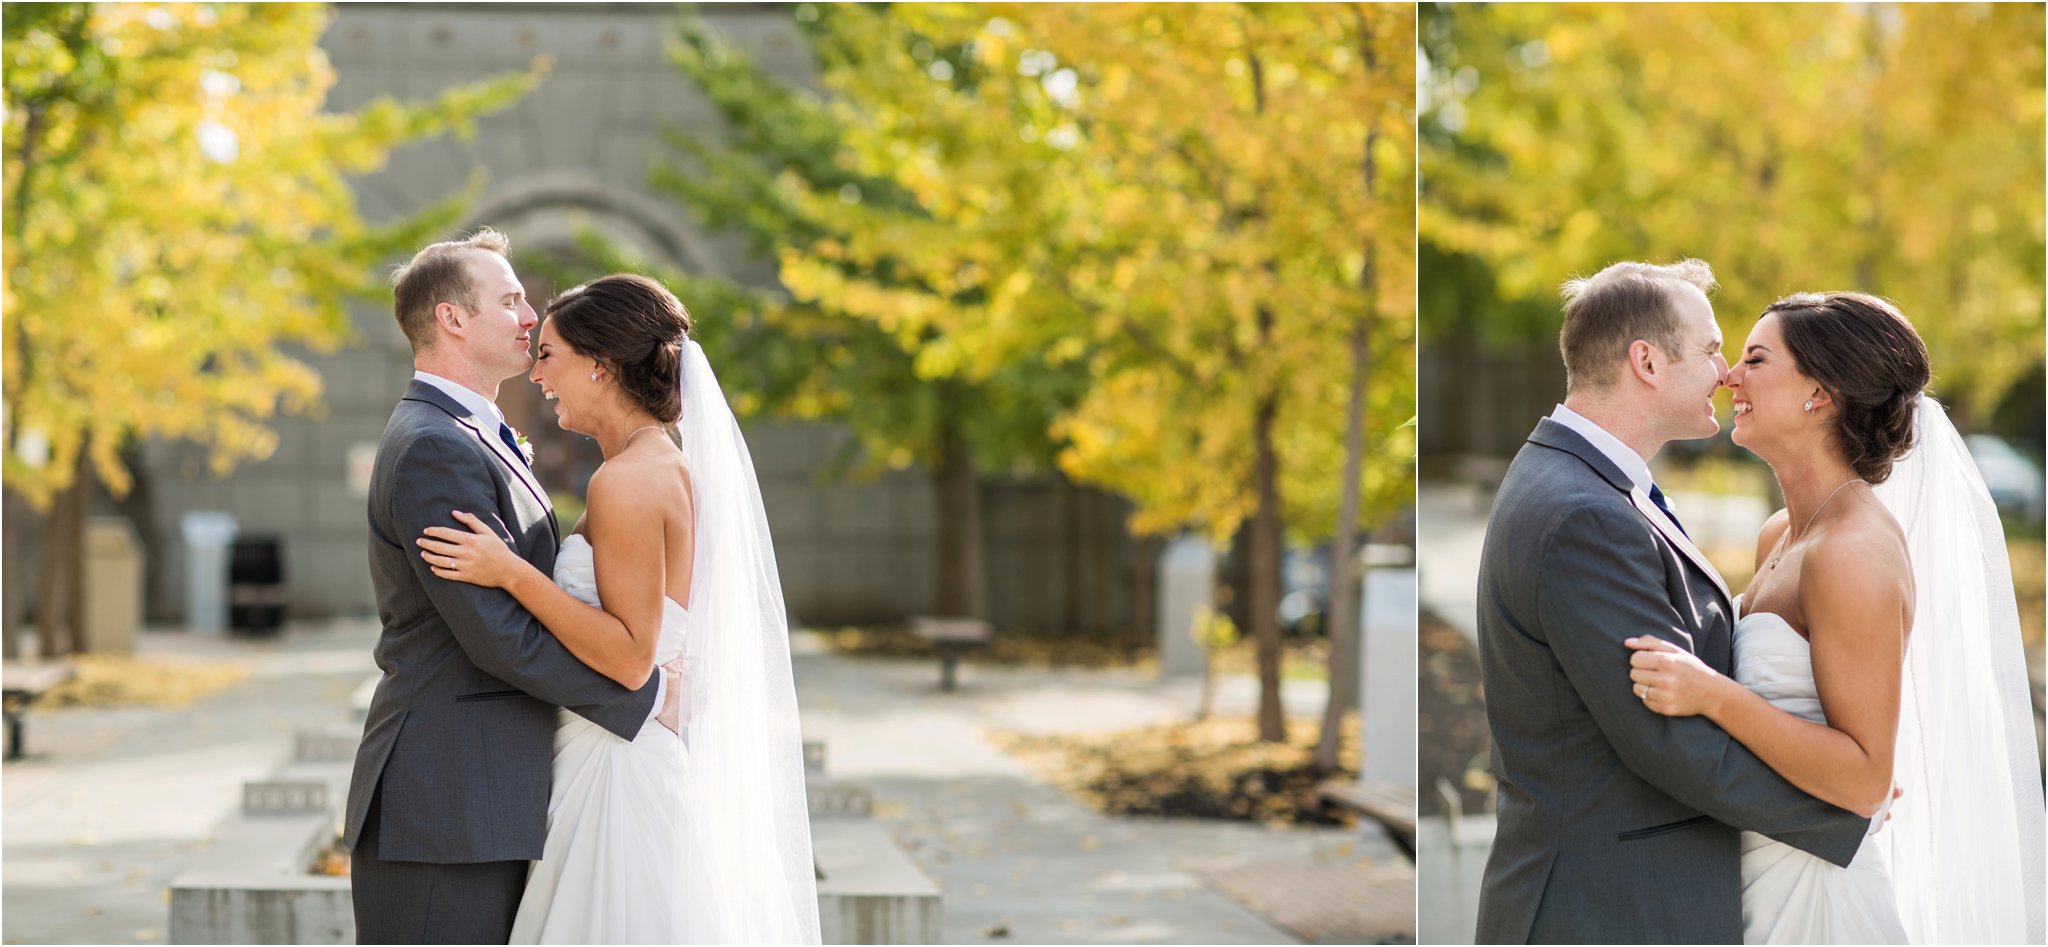 wedding | wedding photos | wedding photography | images by feliciathephotographer.com | Country Club Plaza | Kansas City | Unity Temple | Cancer Survivor Park | bride and groom portraits | candid | laughing bride | David's Bridal | forehead touches 